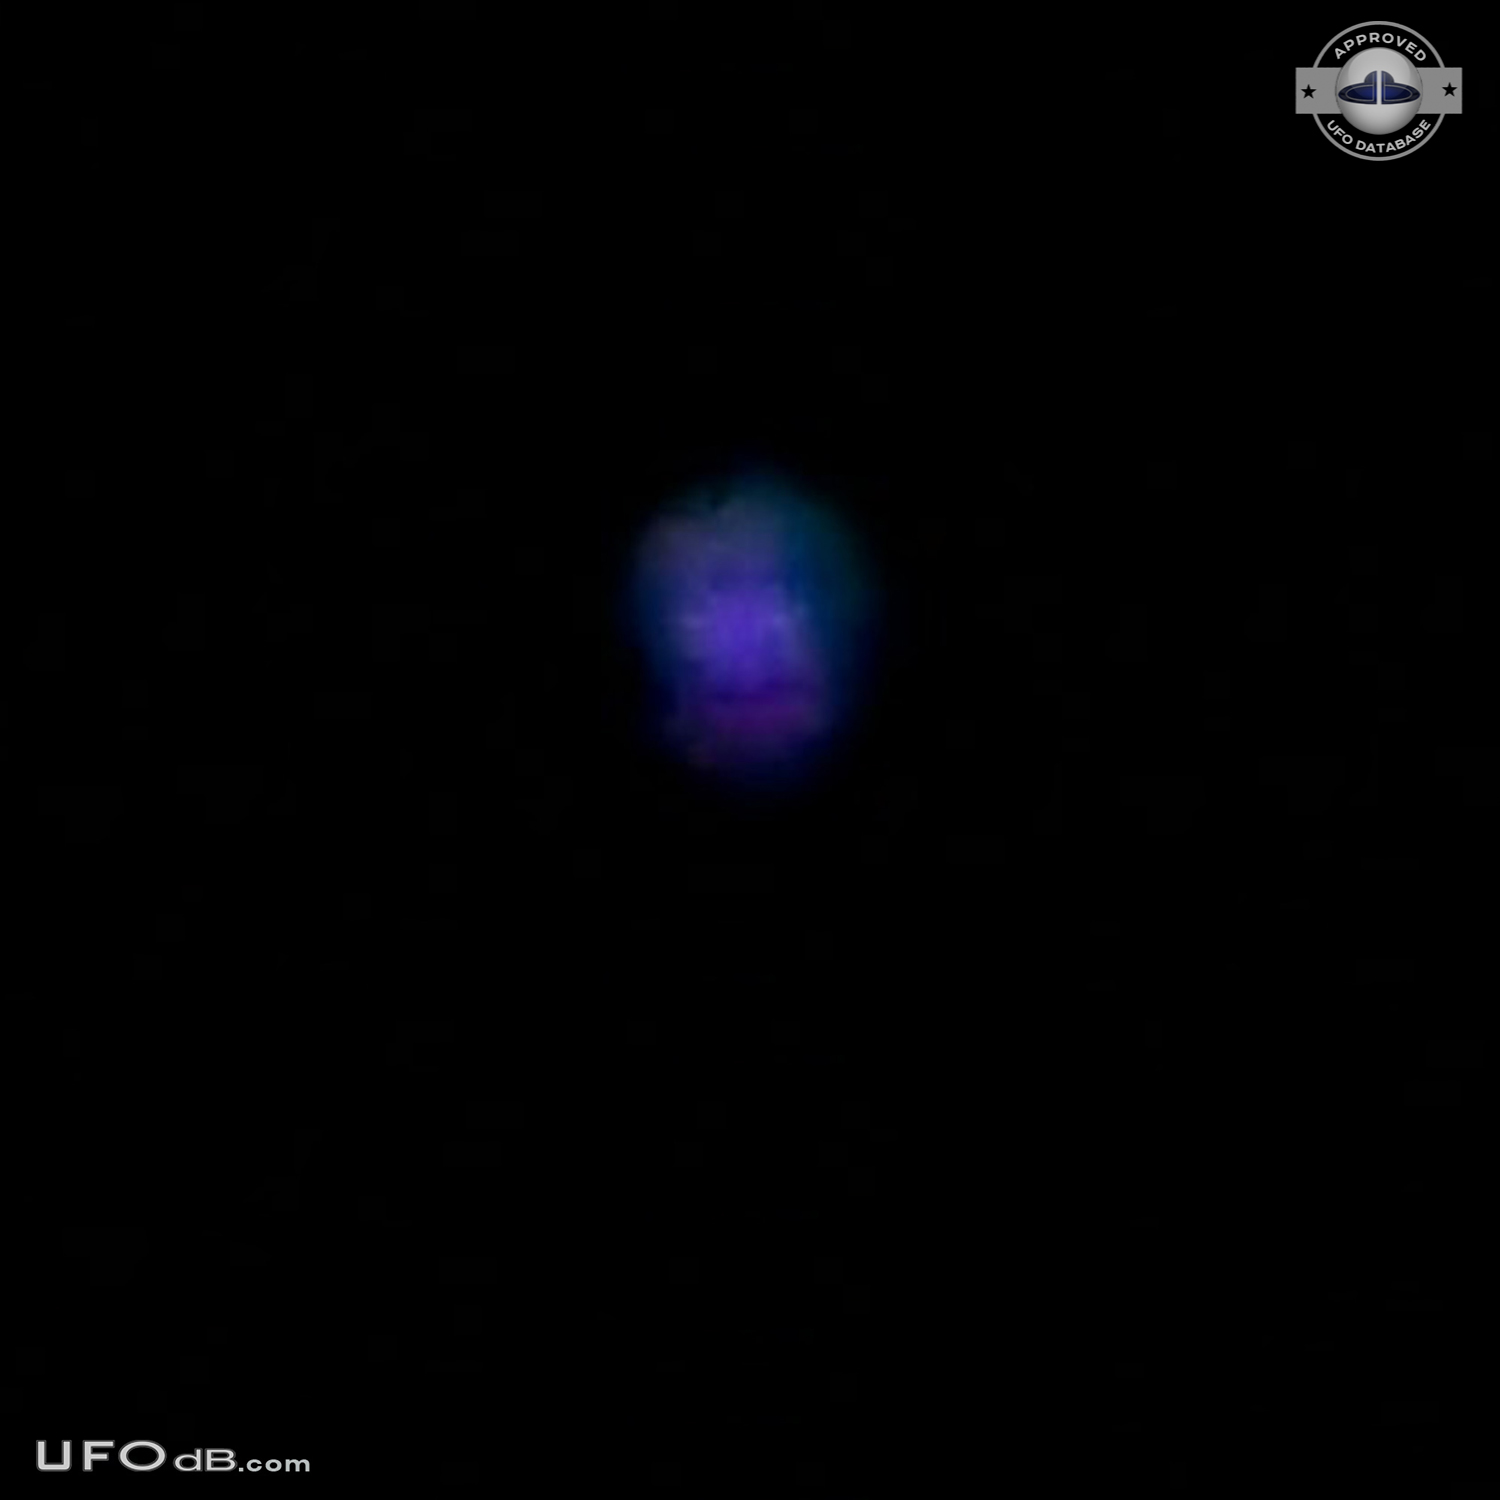 UFO Witness in Antrim New Hampshire unable to get video working - 2012 UFO Picture #527-1